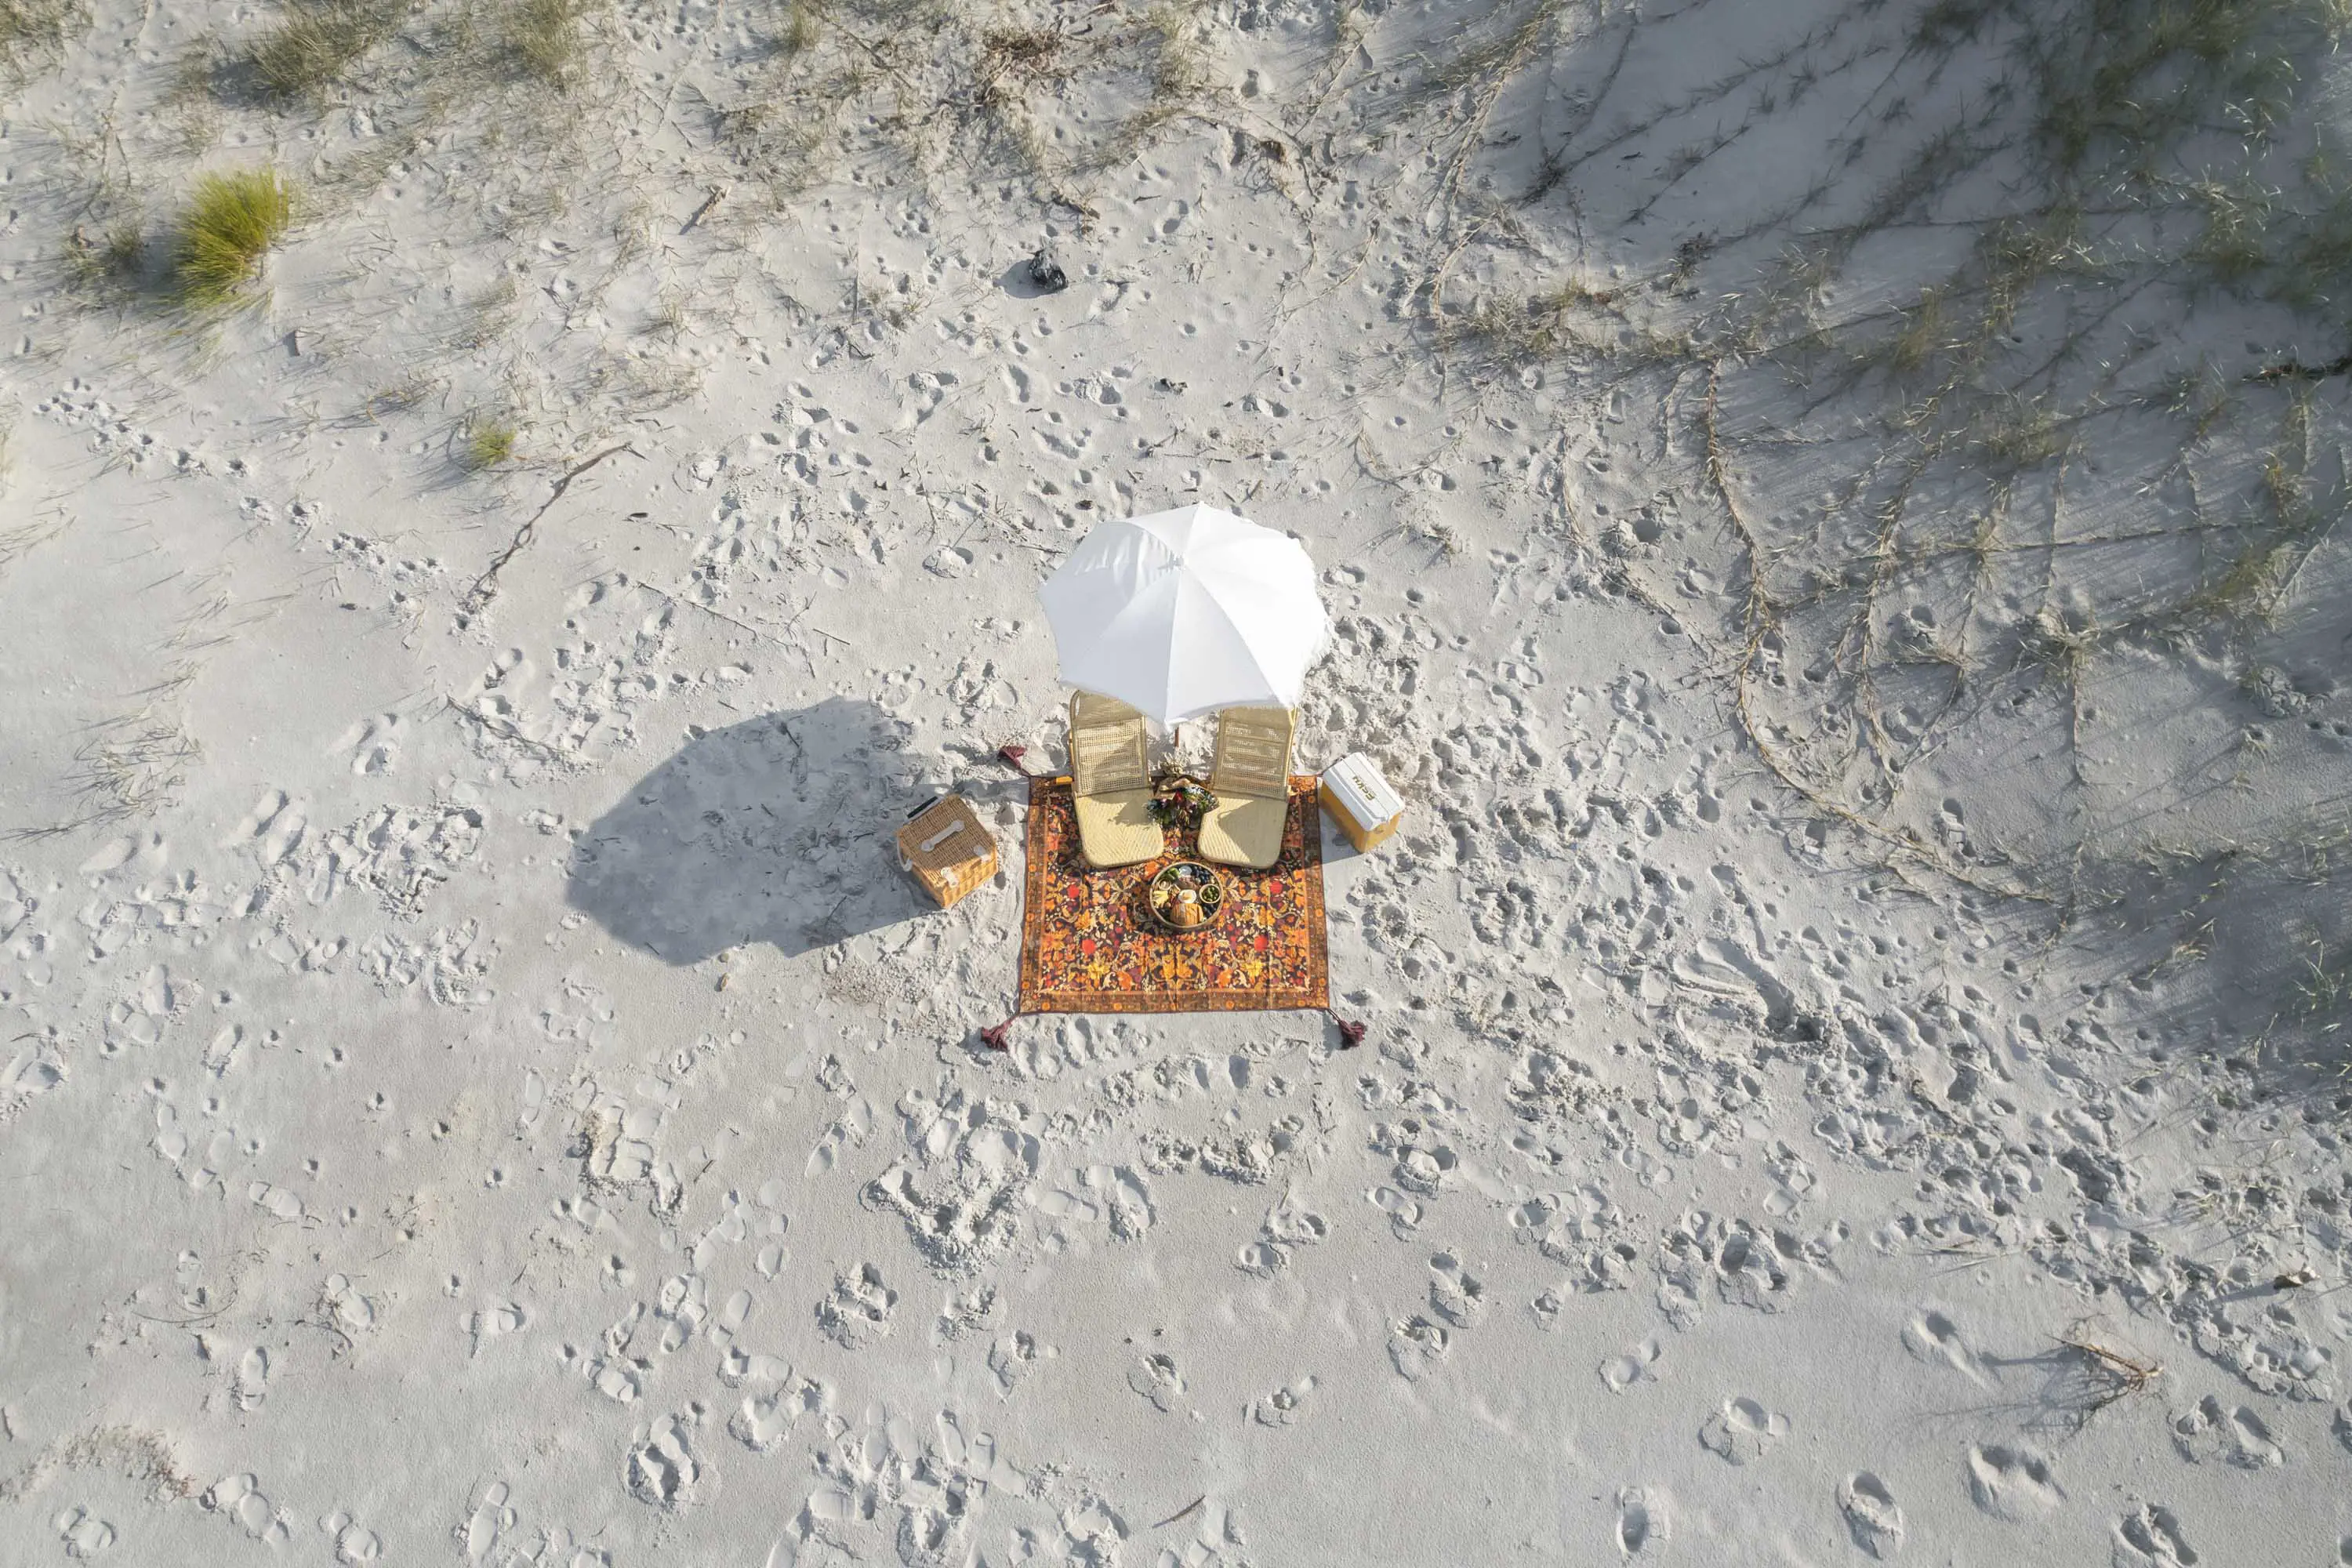 A picnic rug with two chairs sit under a large white umbrella on a white sand beach.